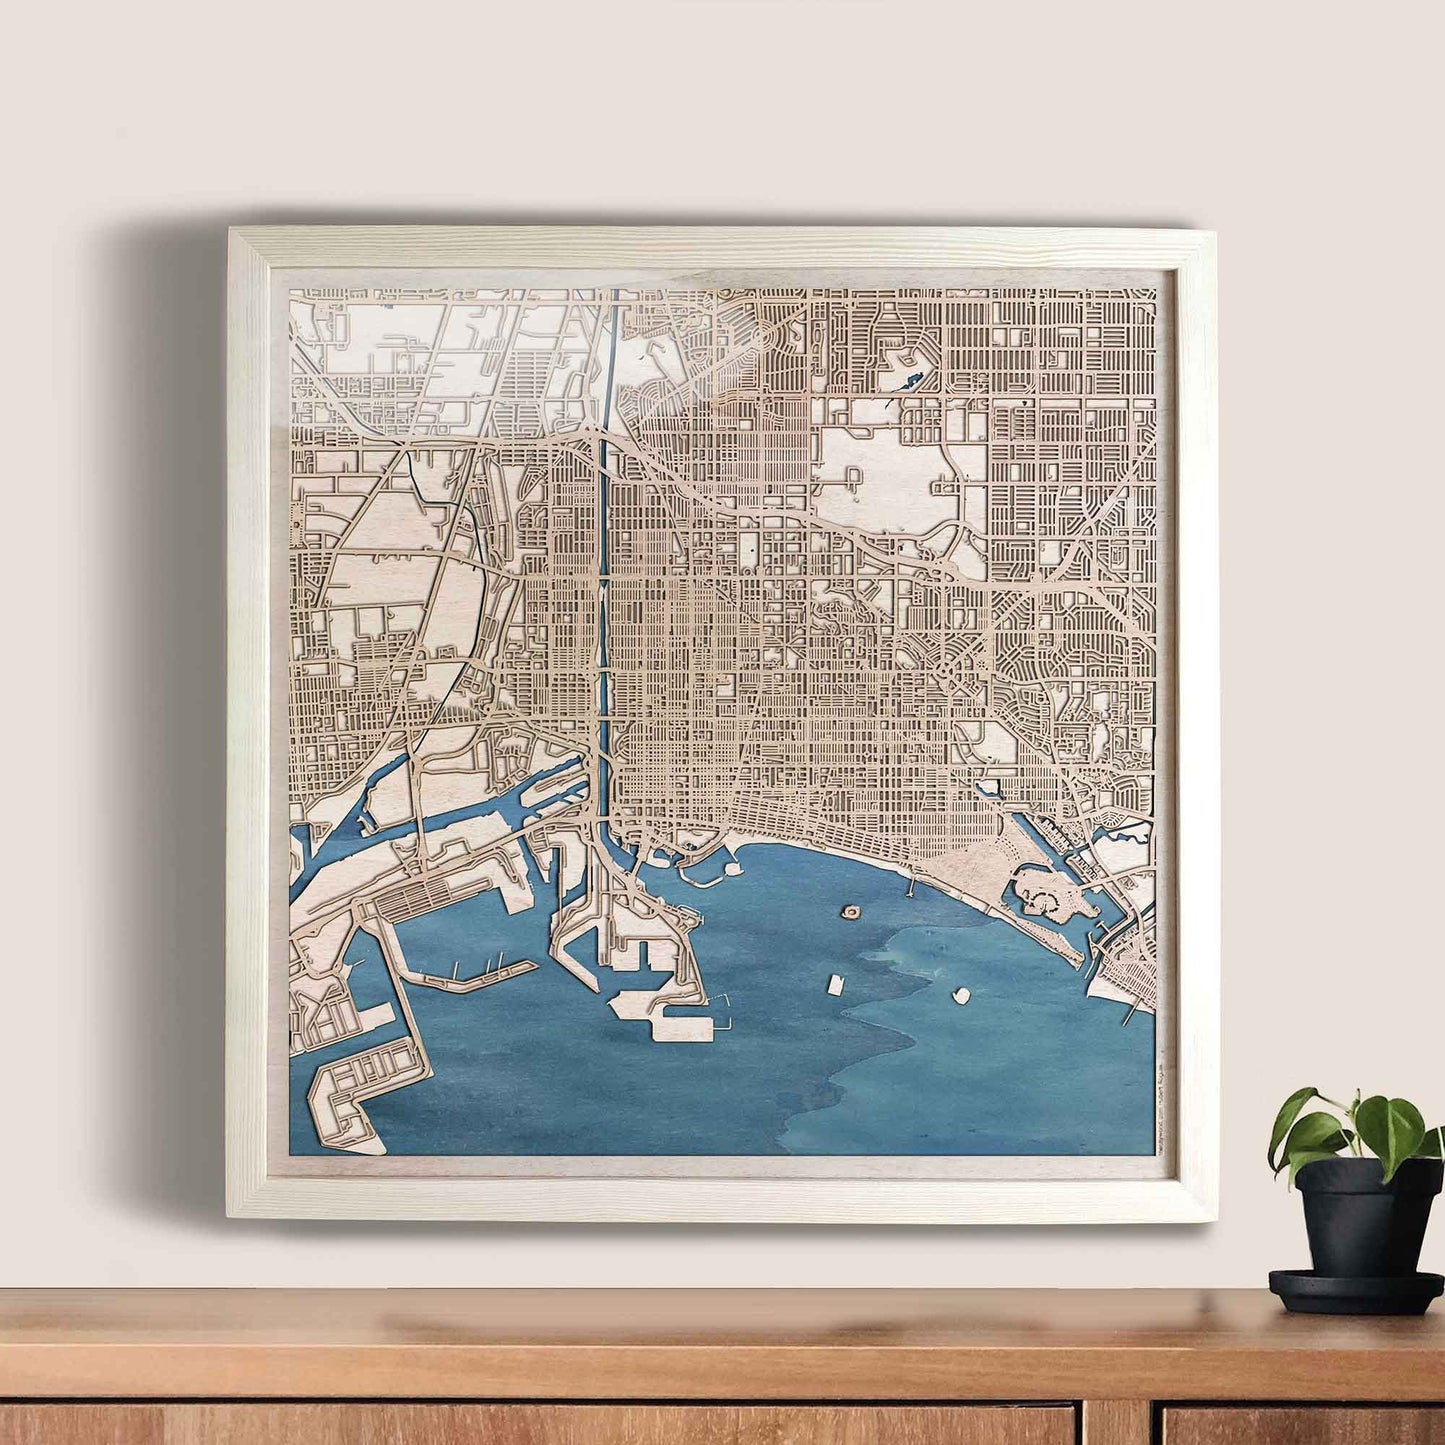 Long Beach Wooden Map by CityWood - Custom Wood Map Art - Unique Laser Cut Engraved - Anniversary Gift